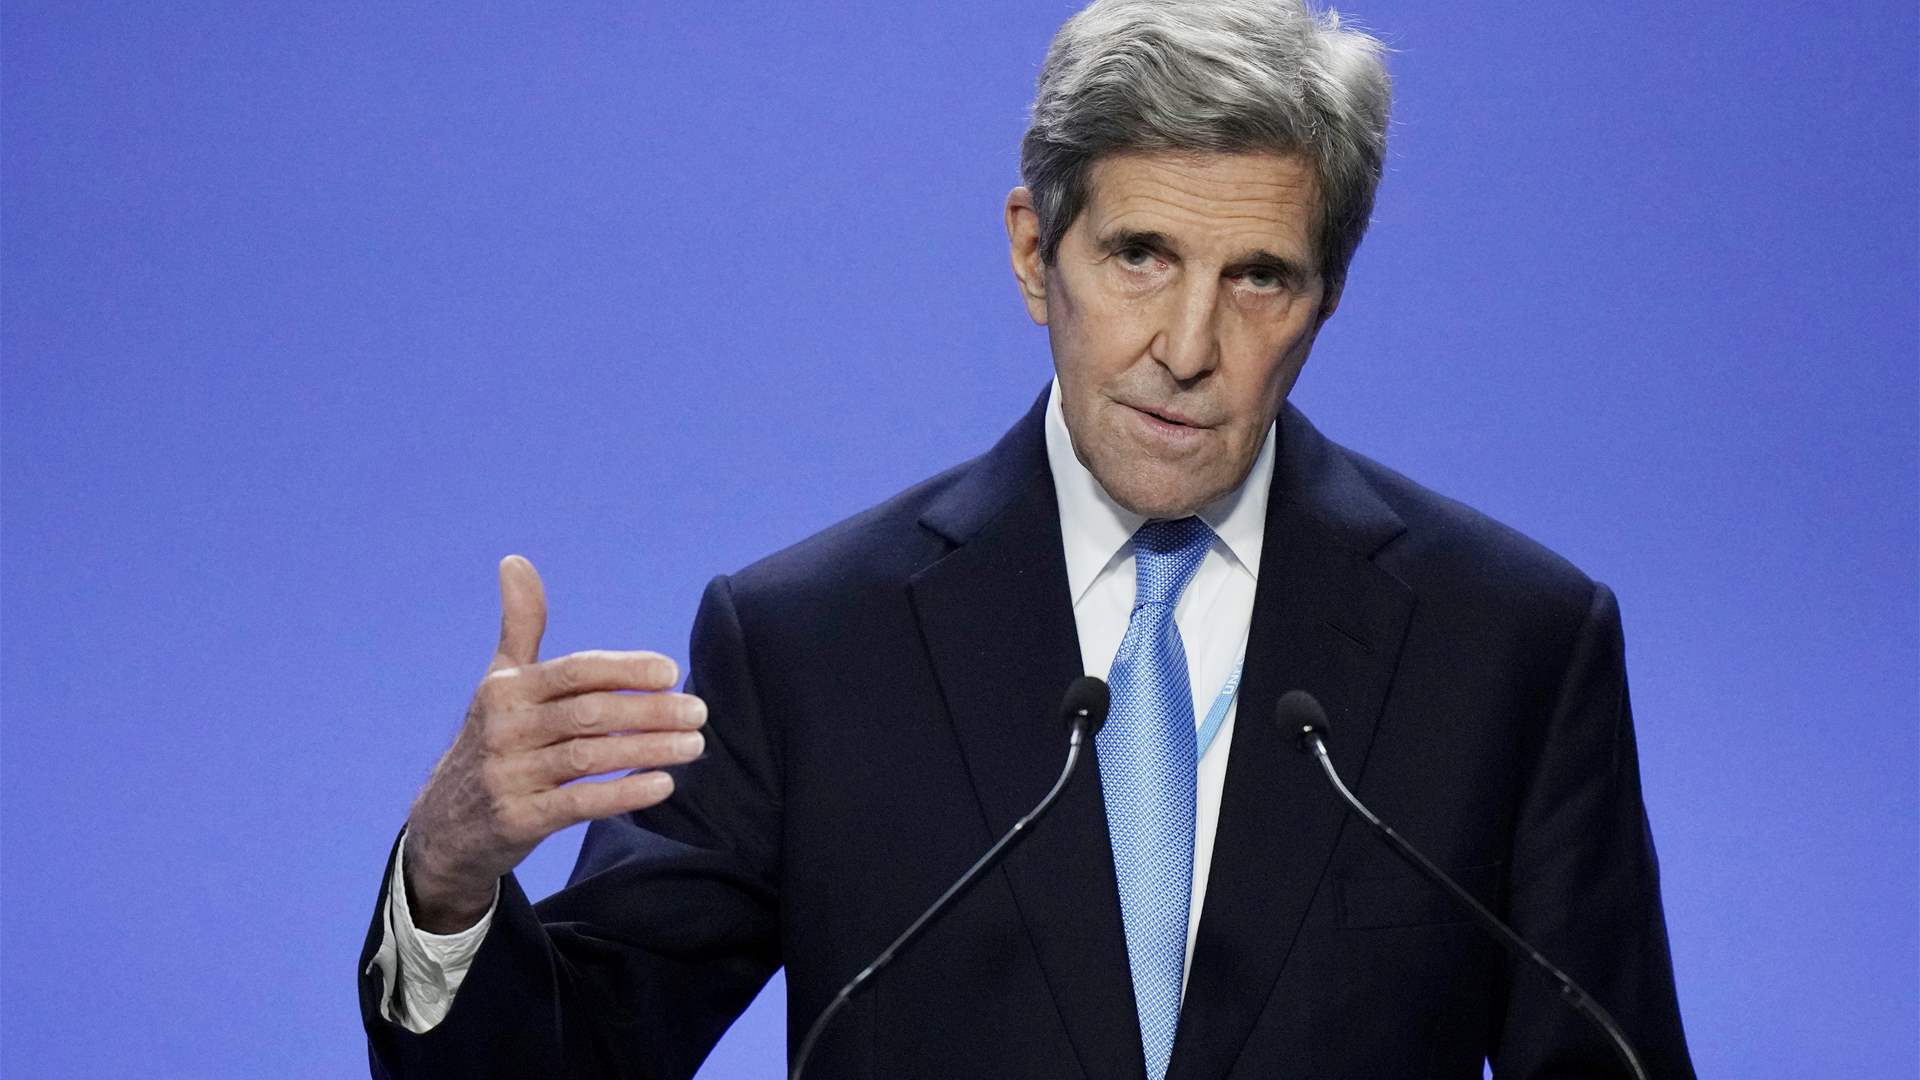 Kerry to resume climate dialogue in Beijing